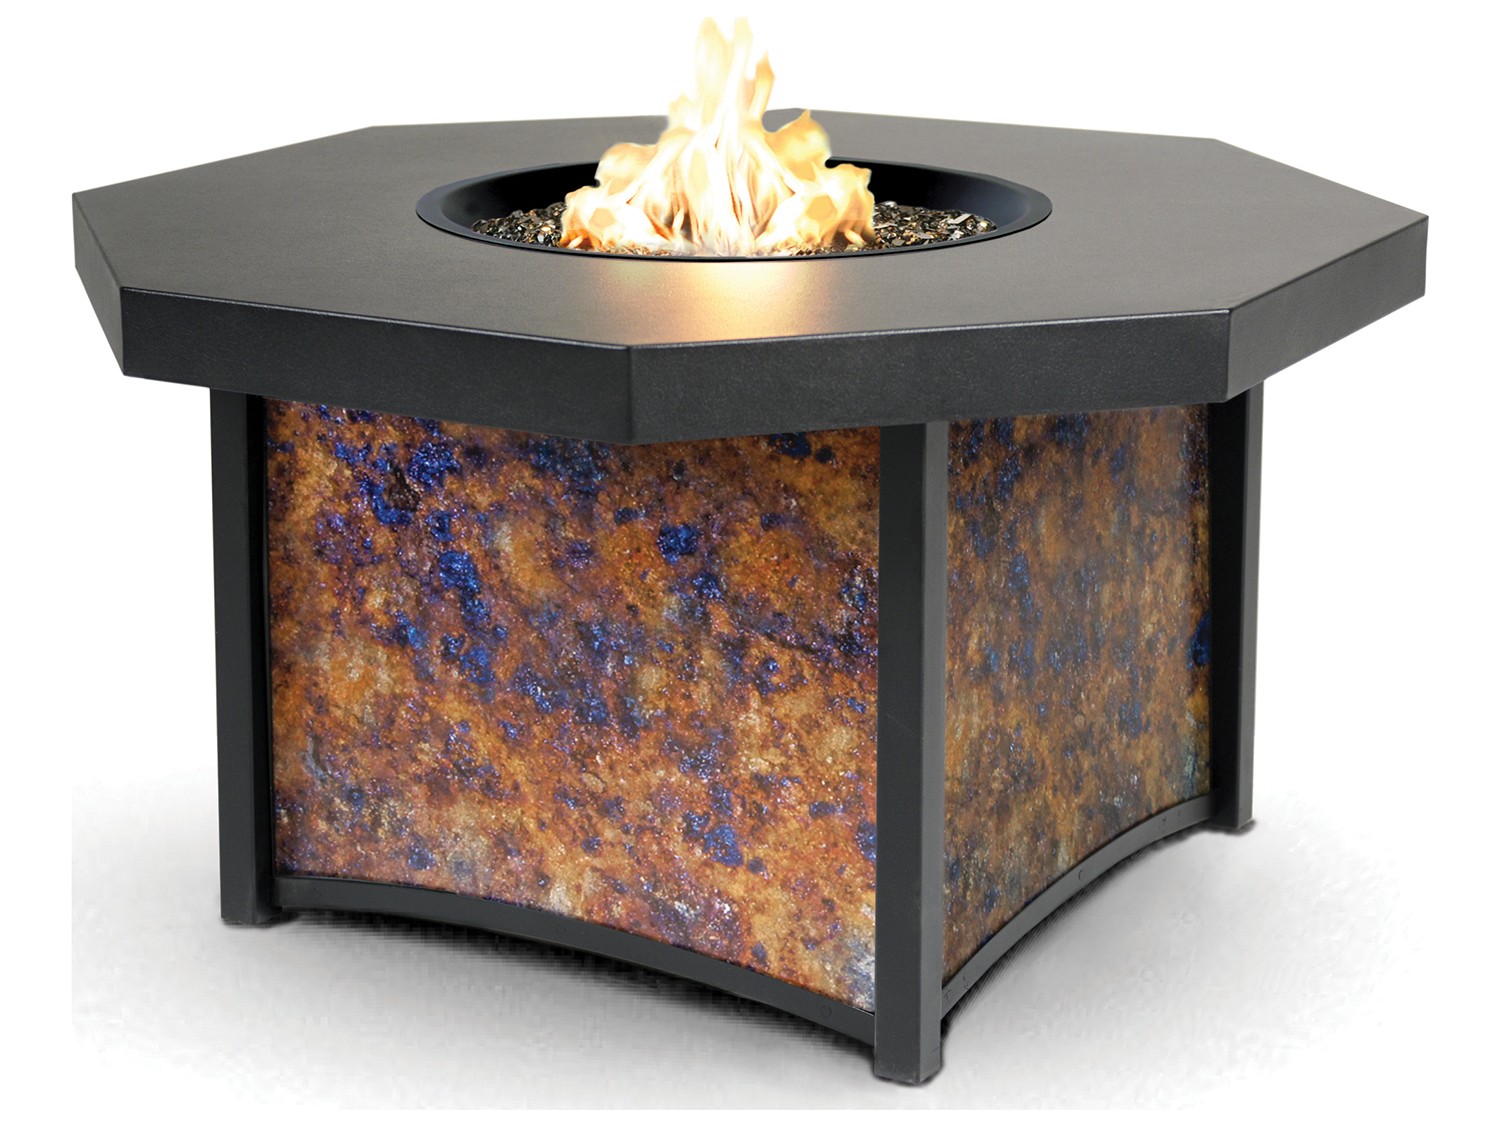 Fire It Up Kansas City Homes Style, Real Flame Crestone Fire Pit